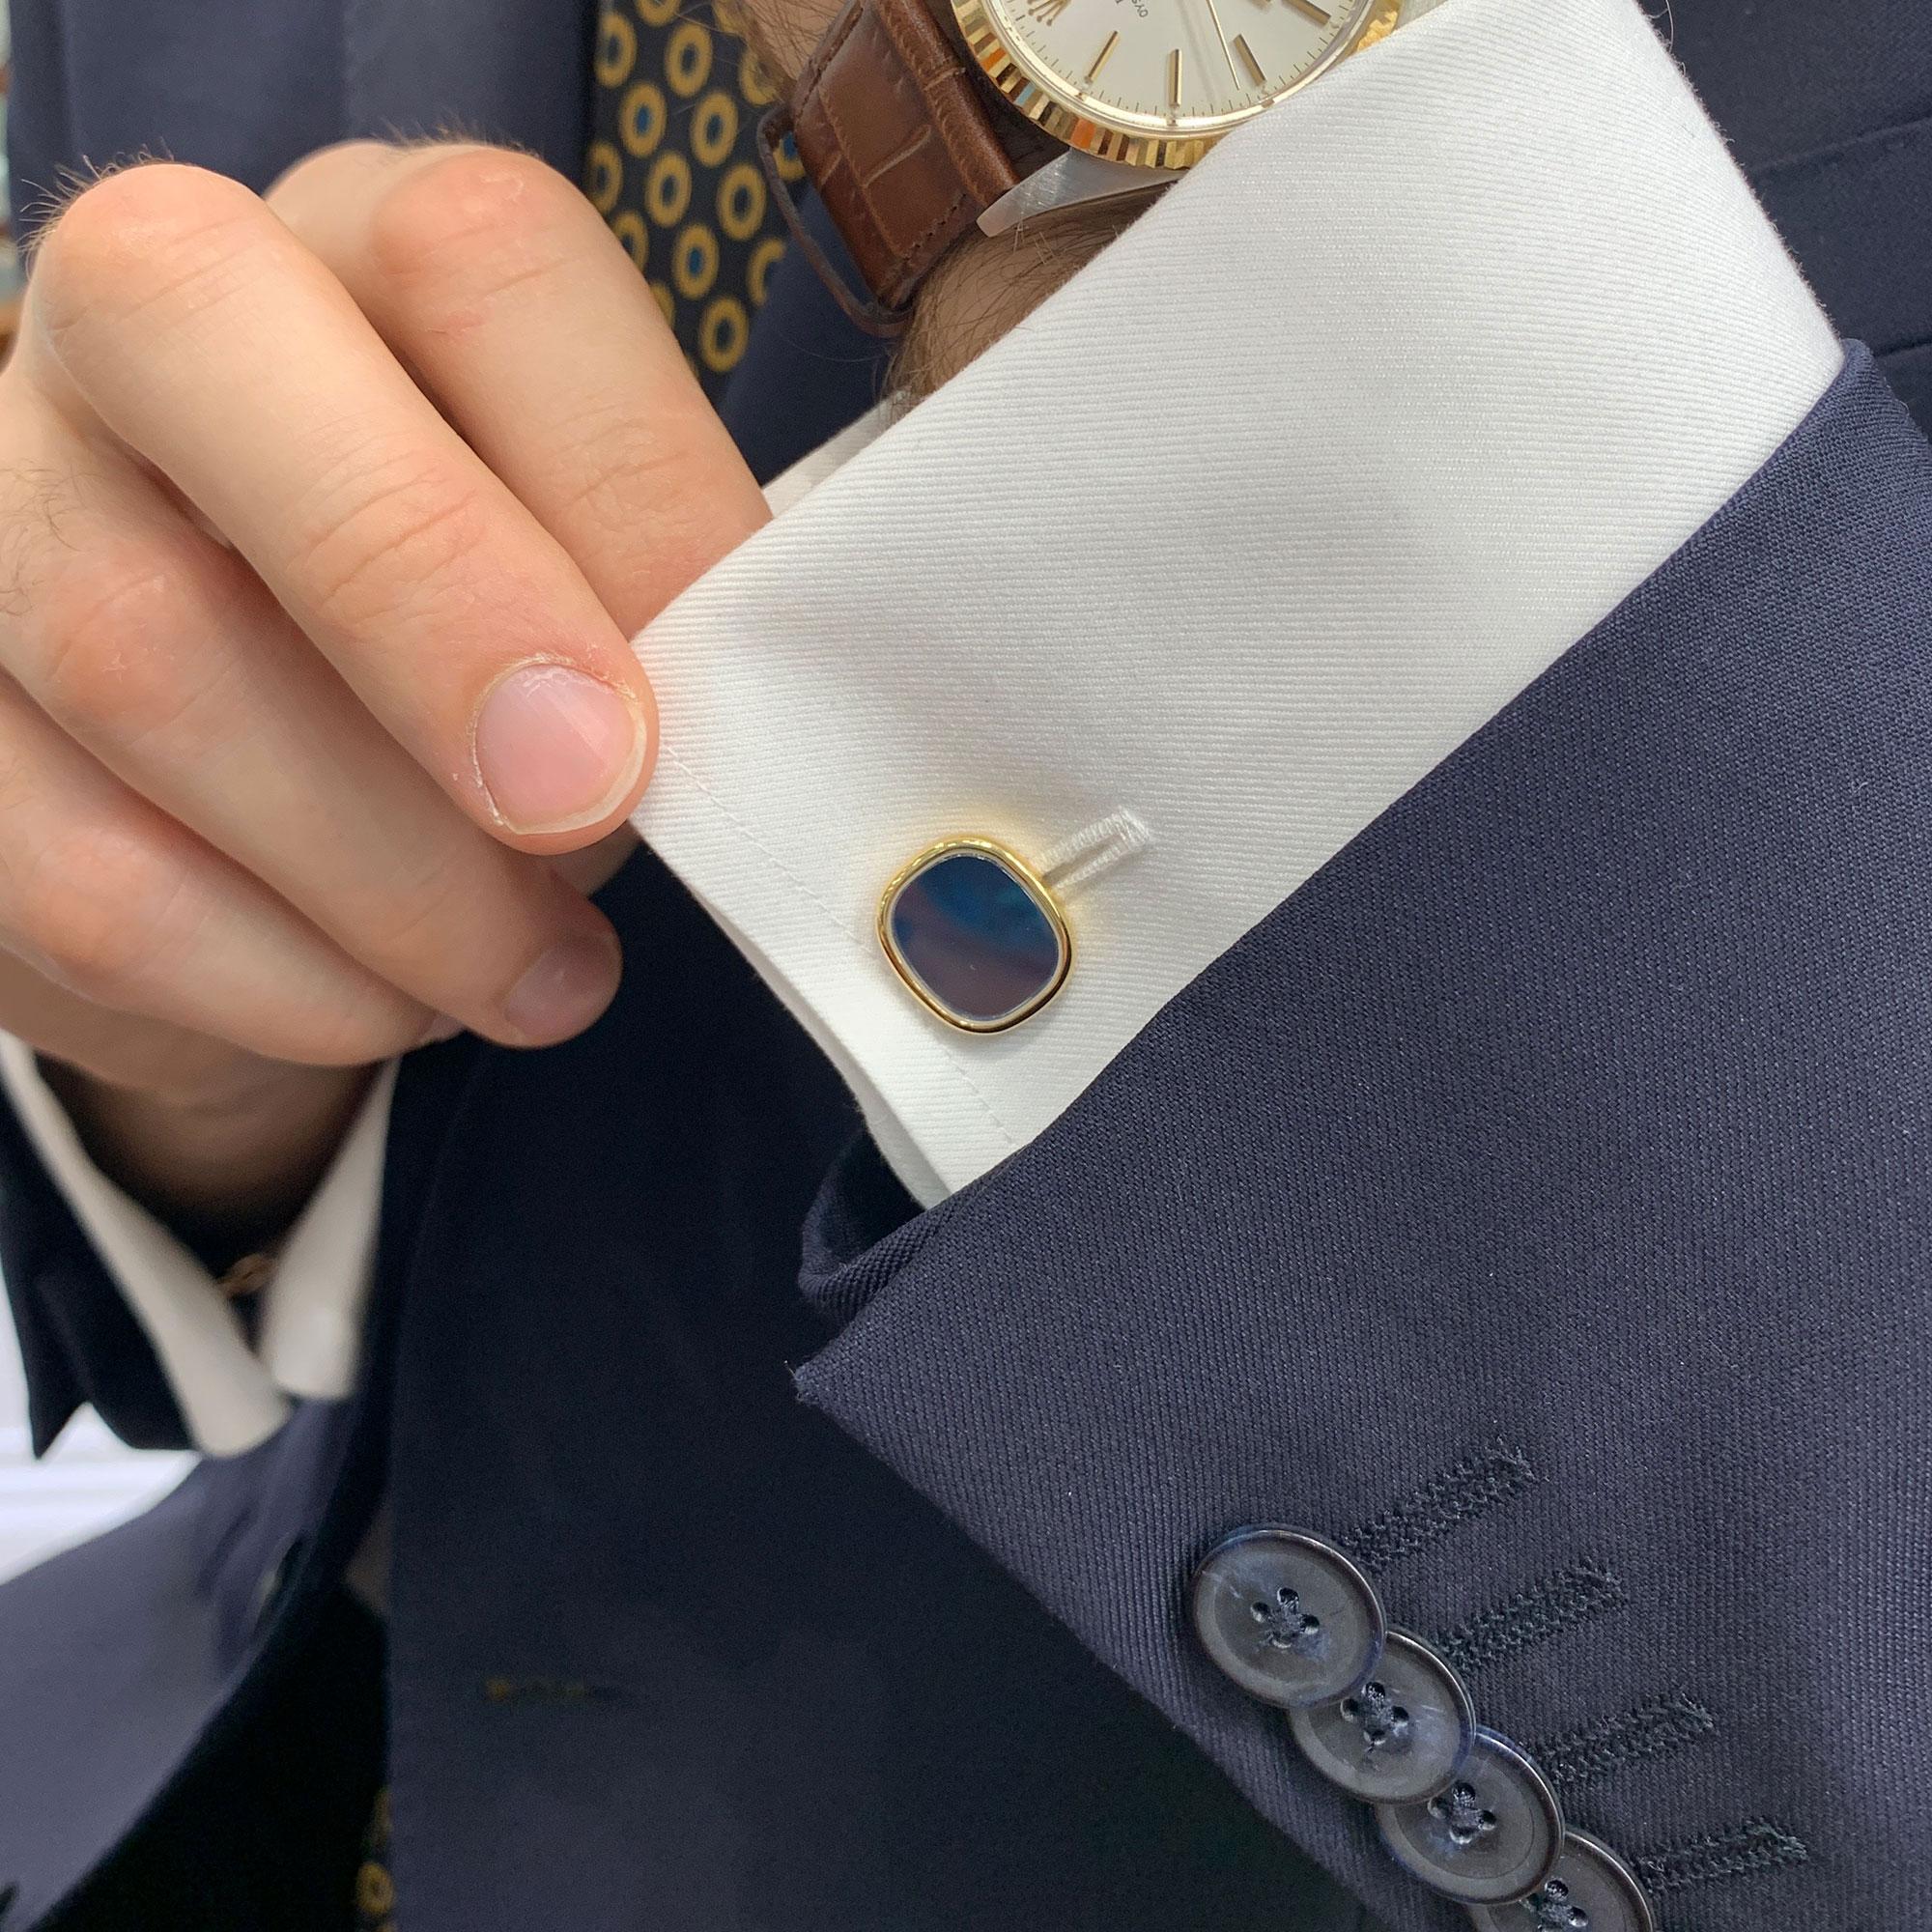 A classic pair of Patek Philippe cufflinks set in 18 carat yellow gold. 

Each cufflink is composed of a cushion-shape plaque decorated with grayish-blue guilloche enamel depicting a radial pattern. This is then capped with a rock crystal tablet,